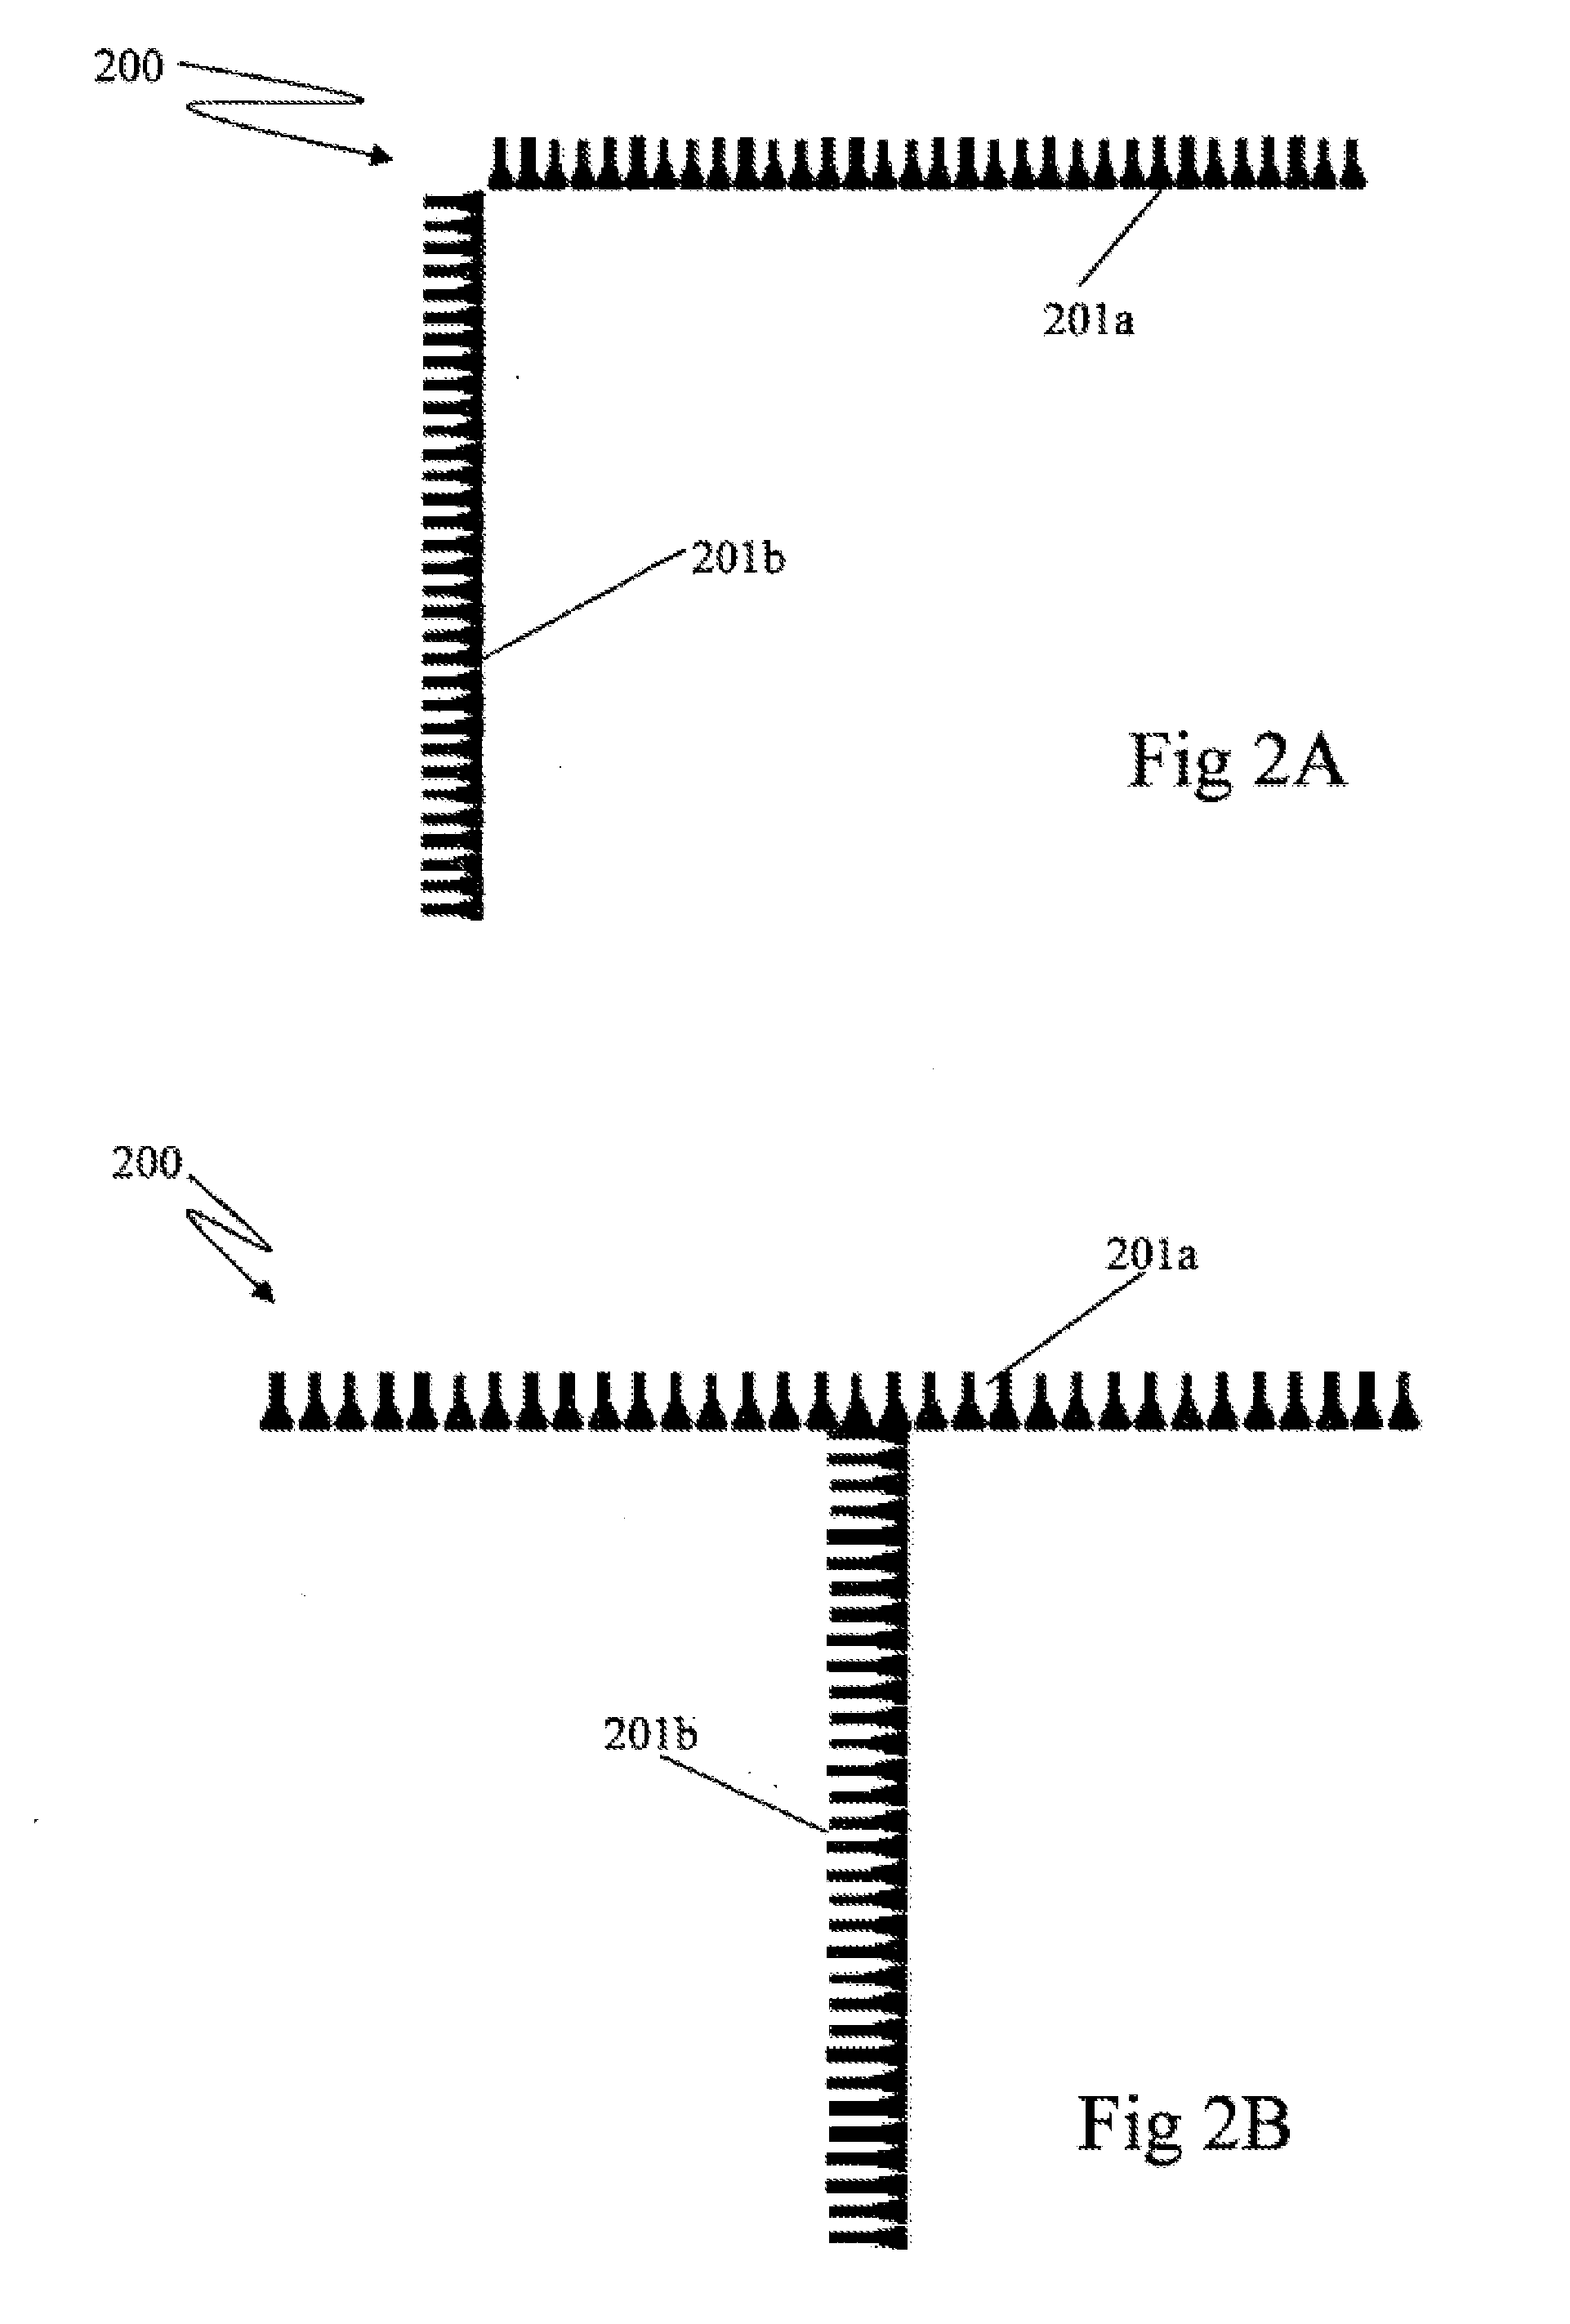 Apparatus and method for assisting vertical takeoff vehicles